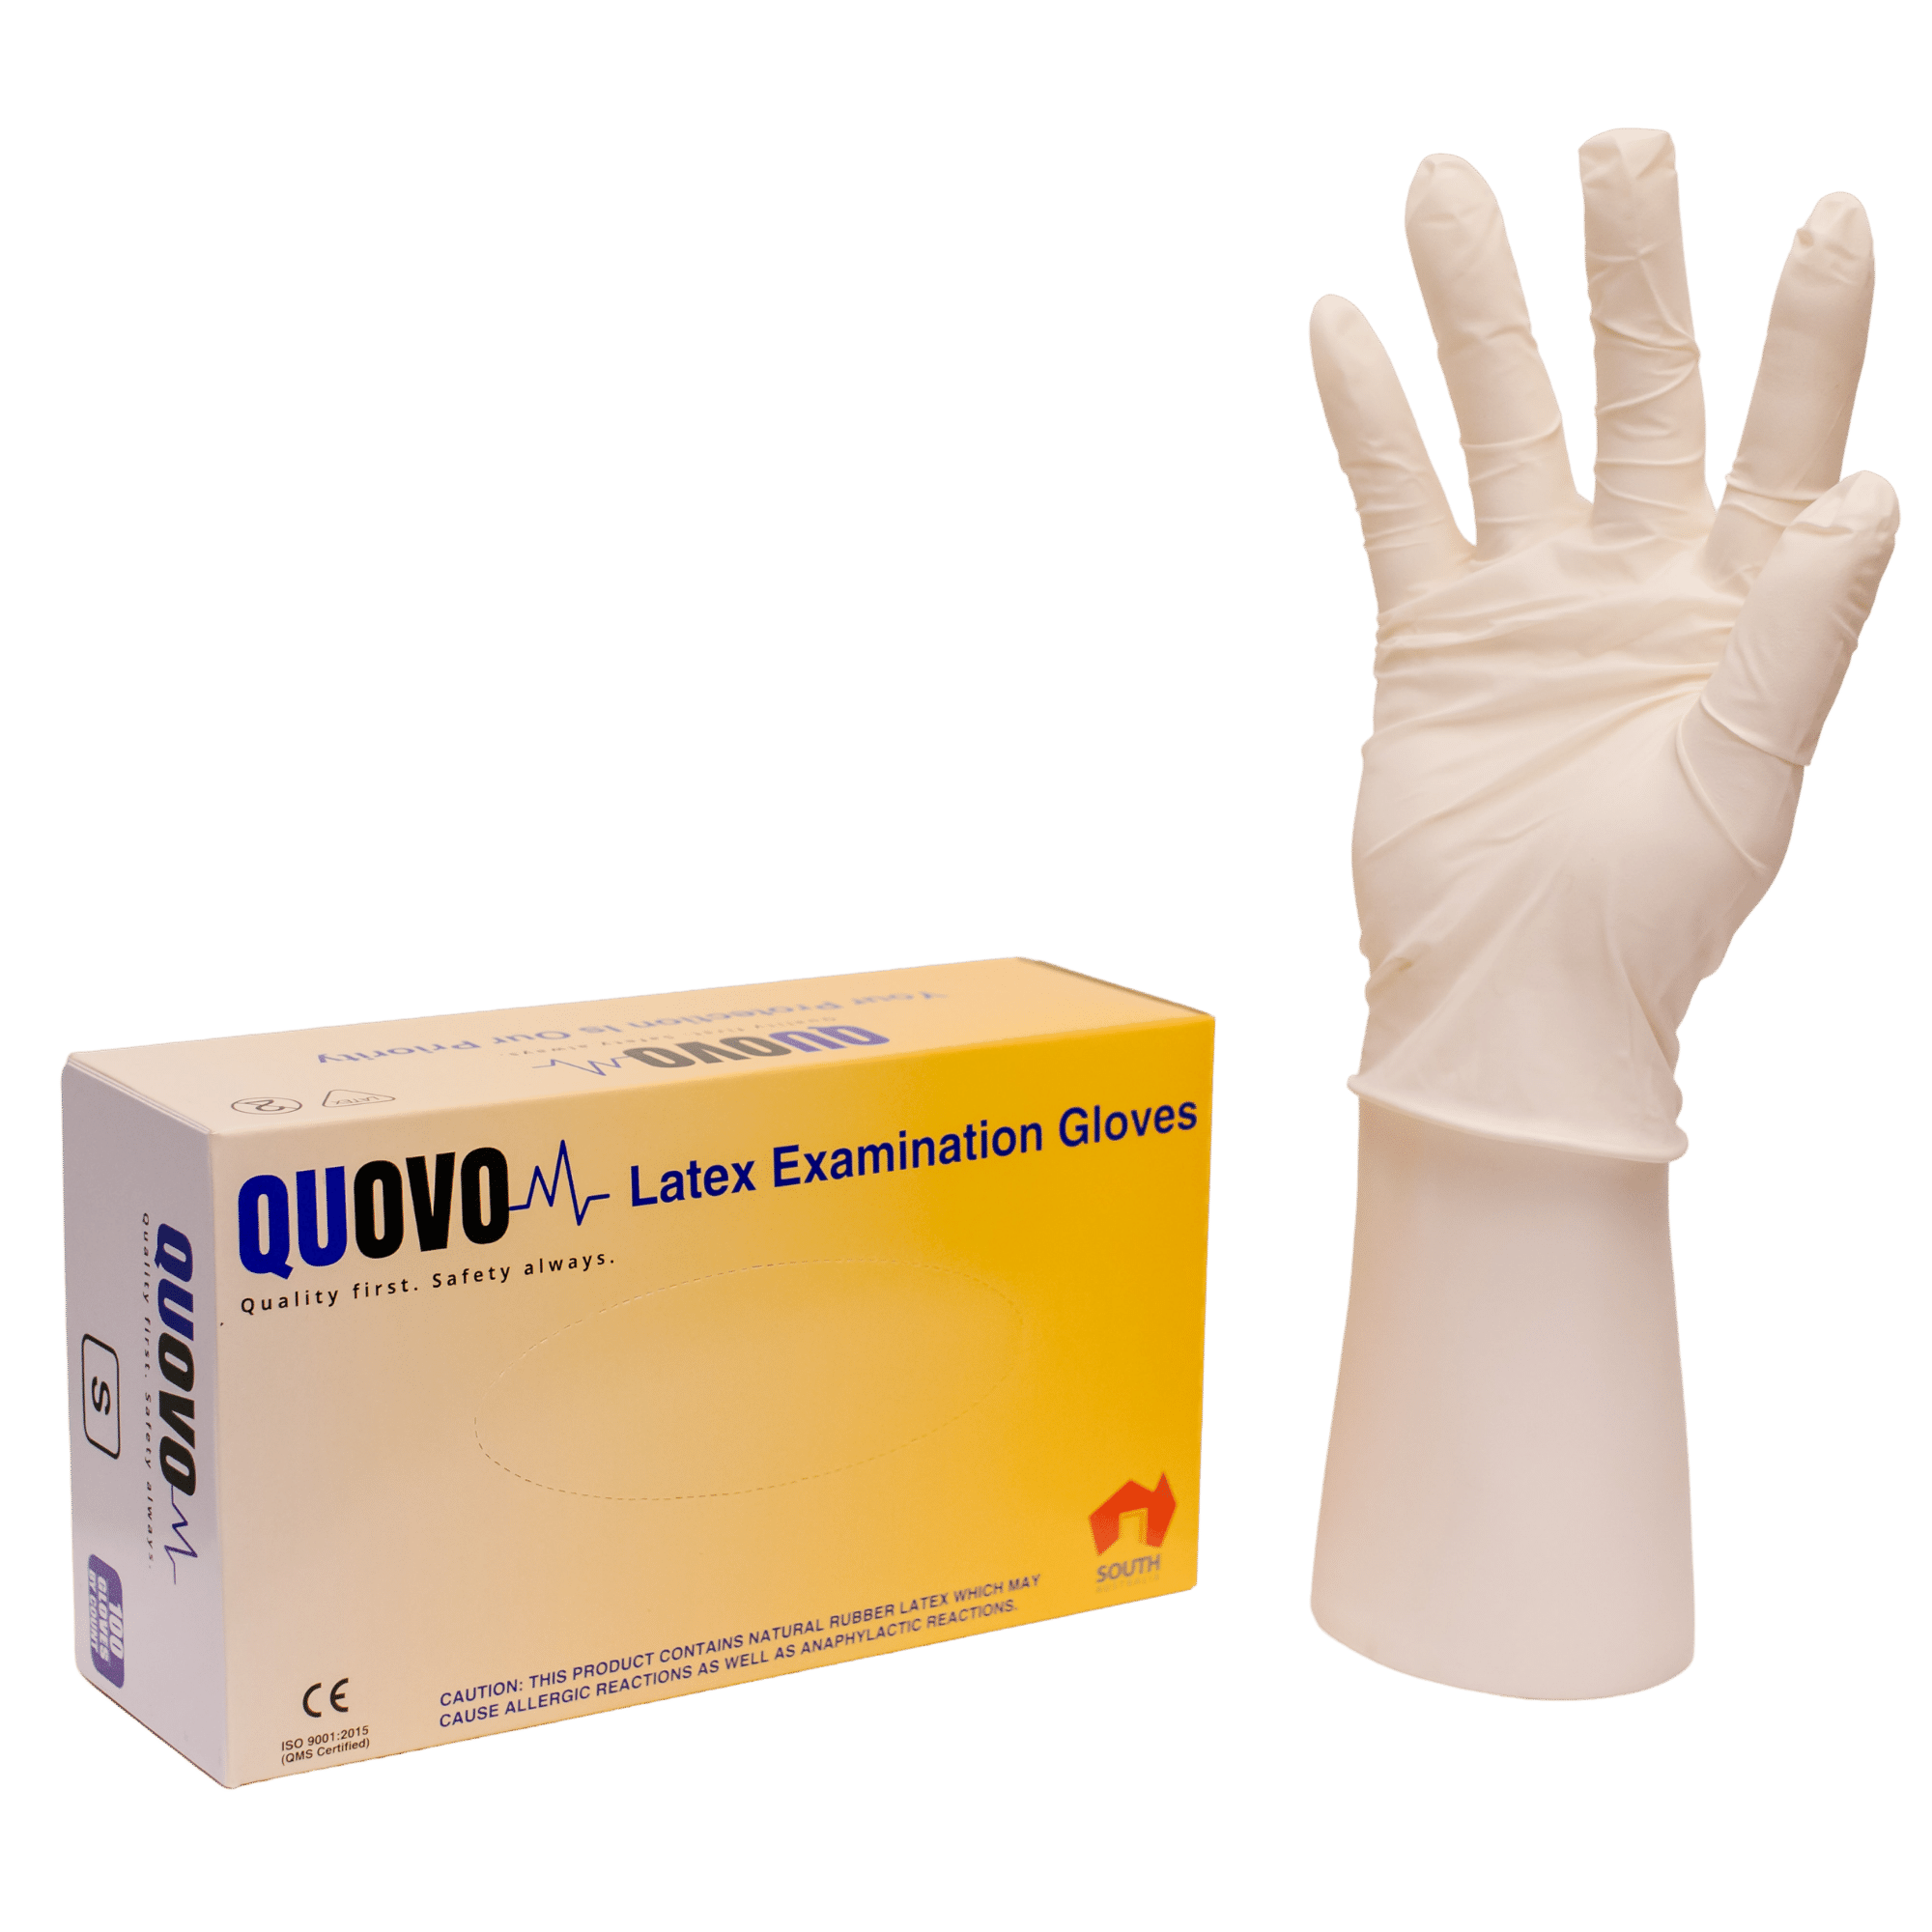 Latex Gloves & Facts about Quovo Examination Gloves